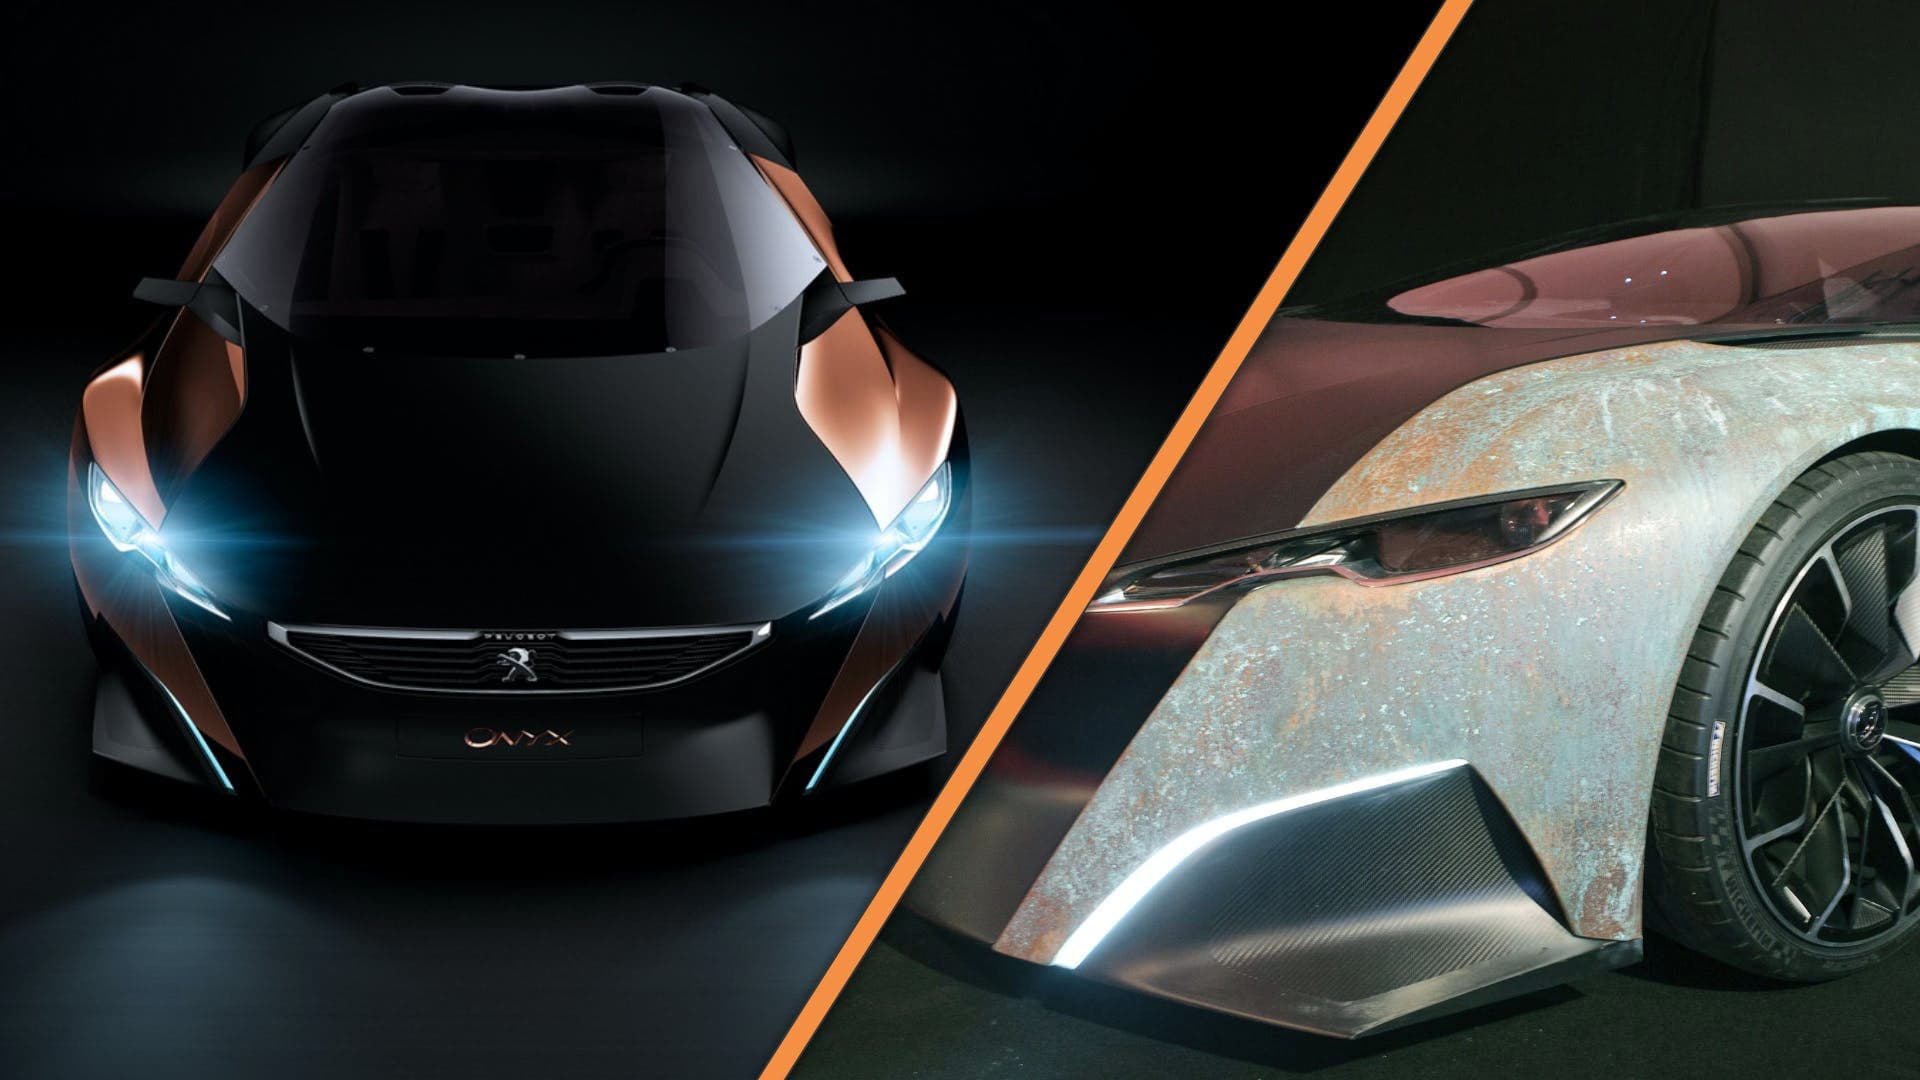 The Peugeot Onyx Was a Copper-Bodied Supercar that Aged Like the Statue of Liberty